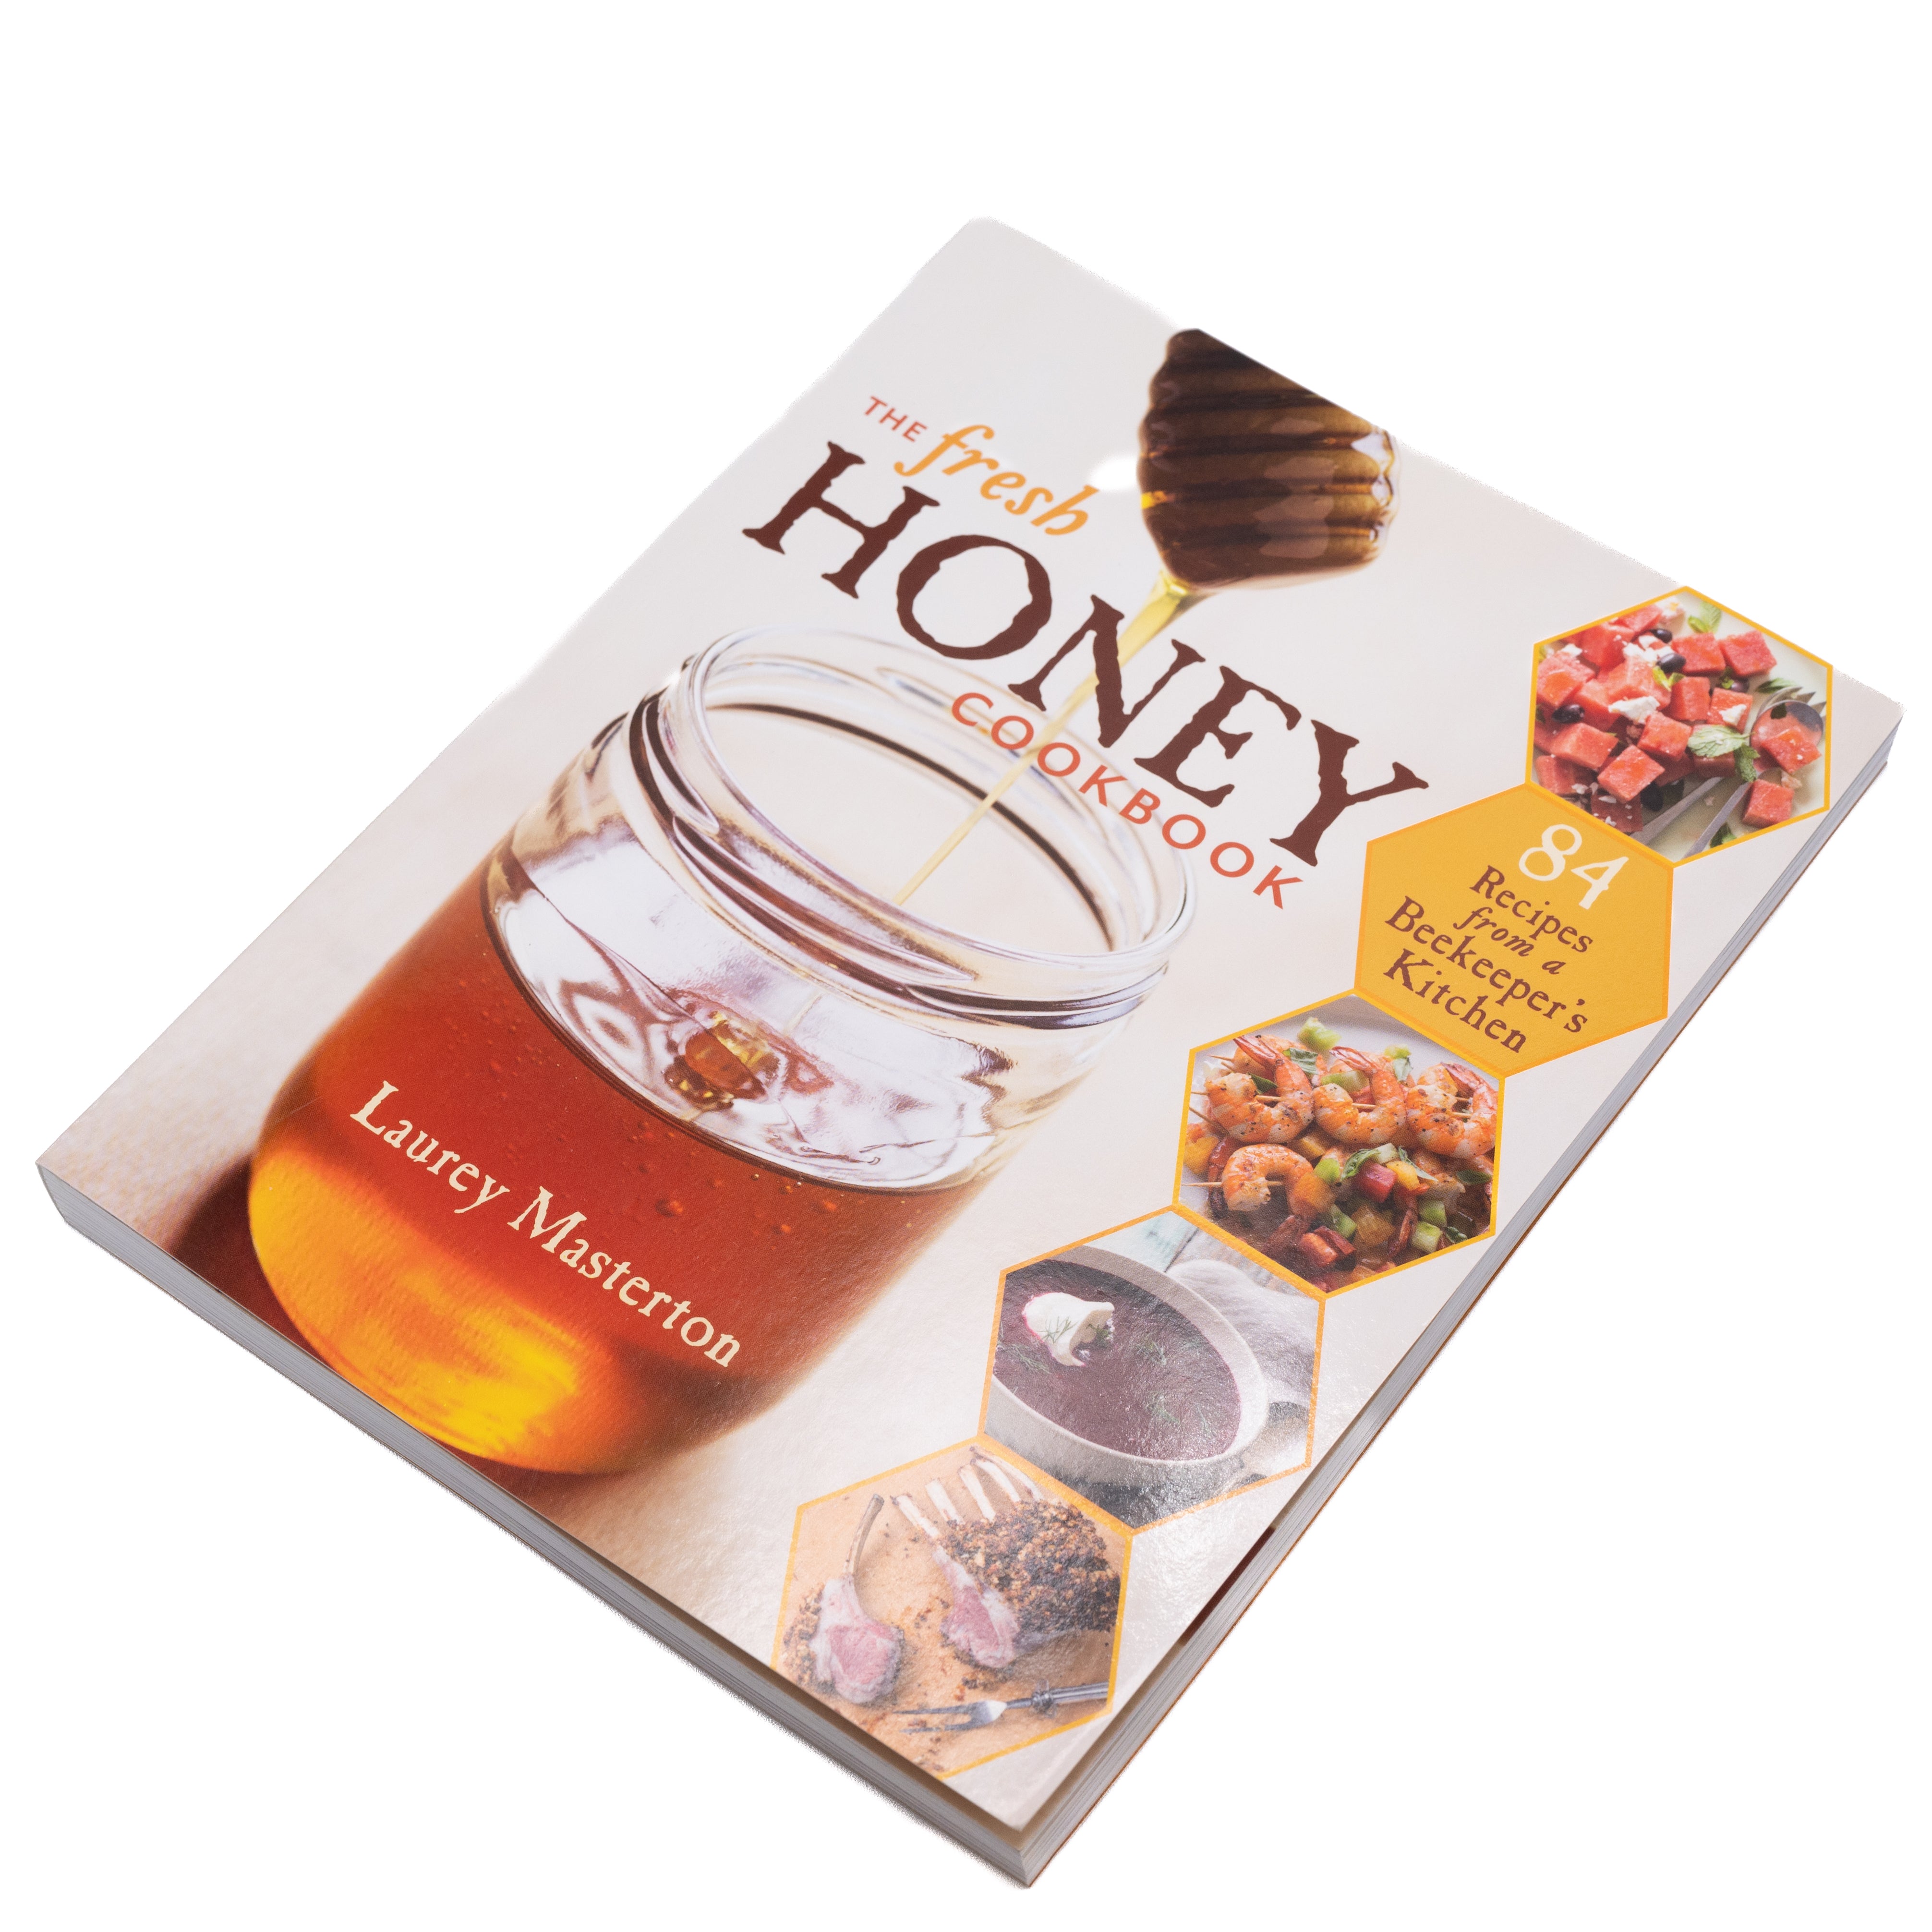 Front cover of the fresh honey cookbook by Laurey Masterton featuring a large jar of liquid honey